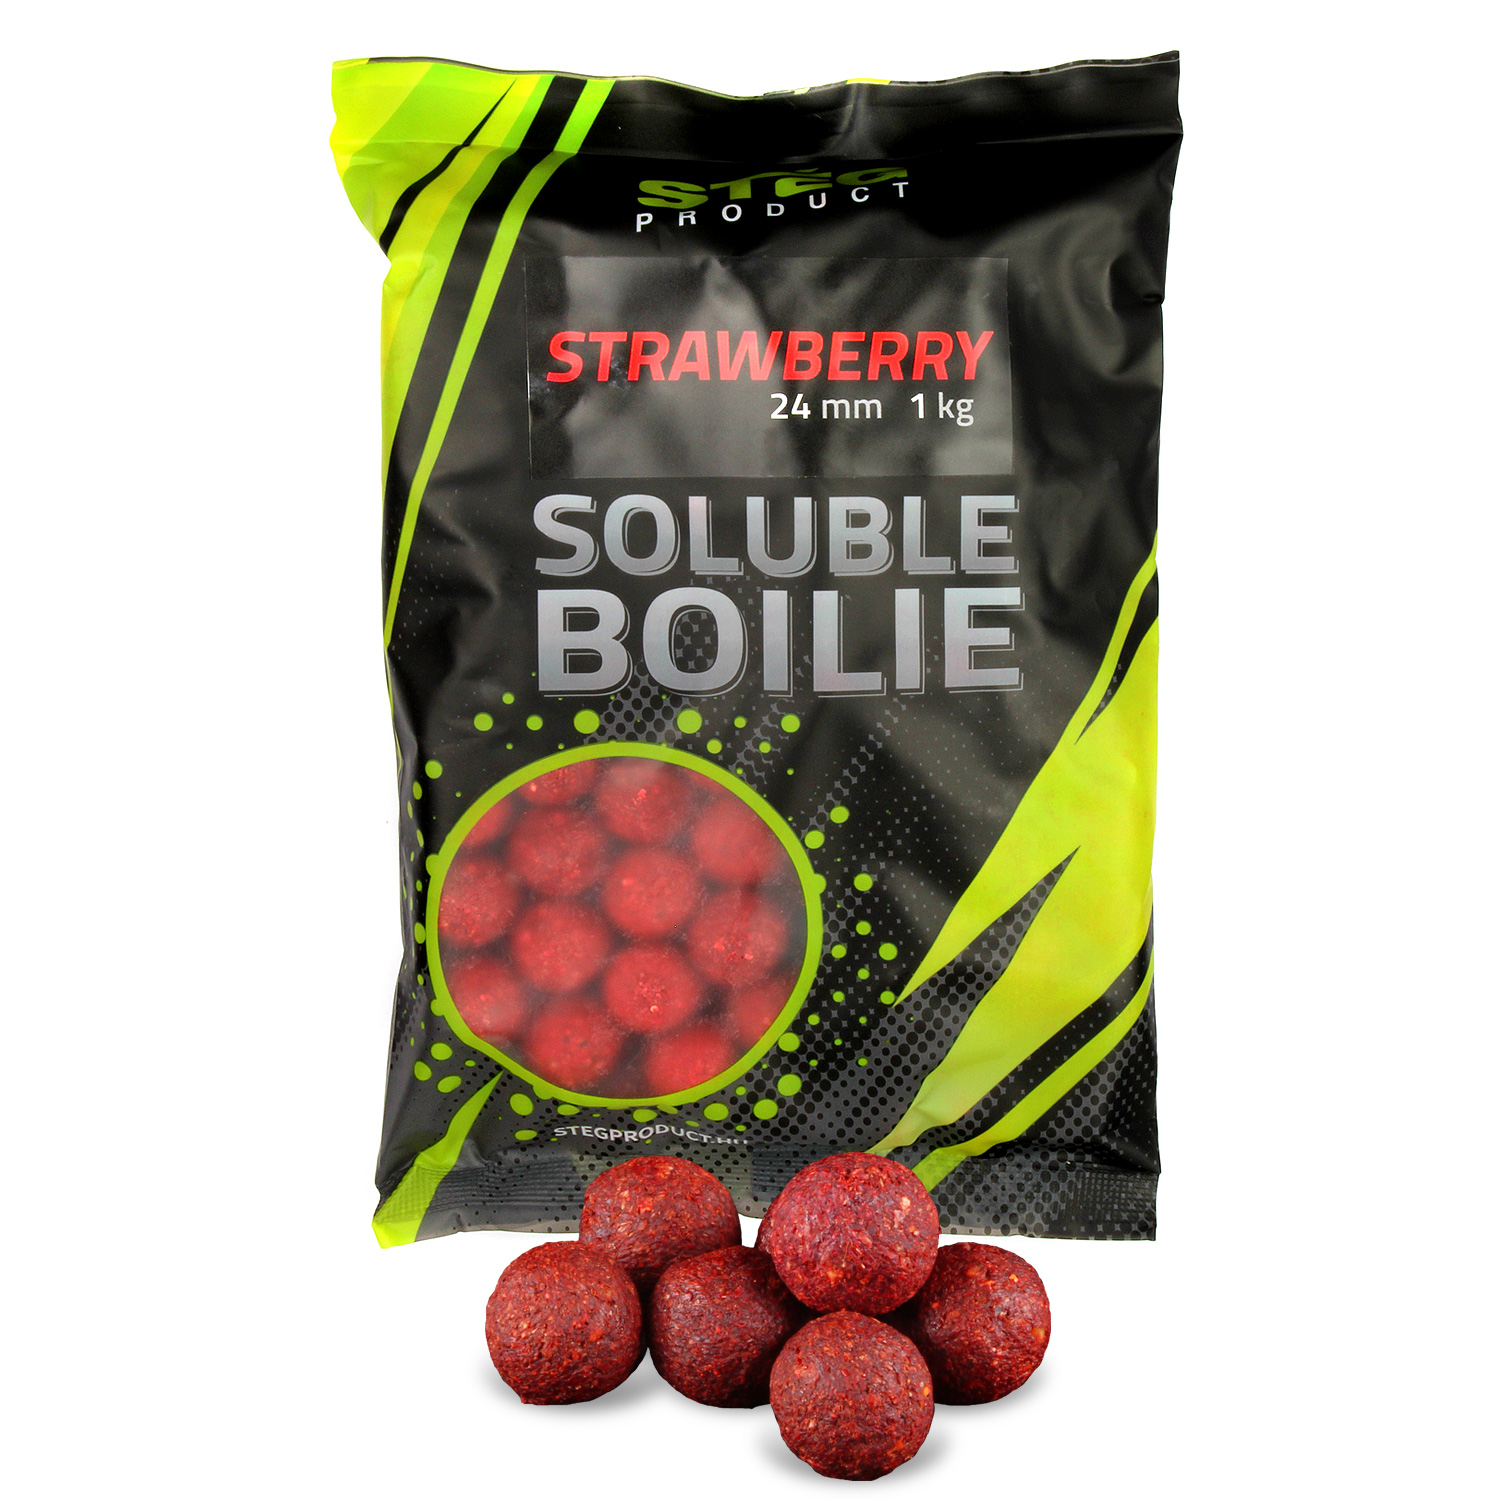 Stg Product Soluble Boilie 20mm Strawberry 1kg